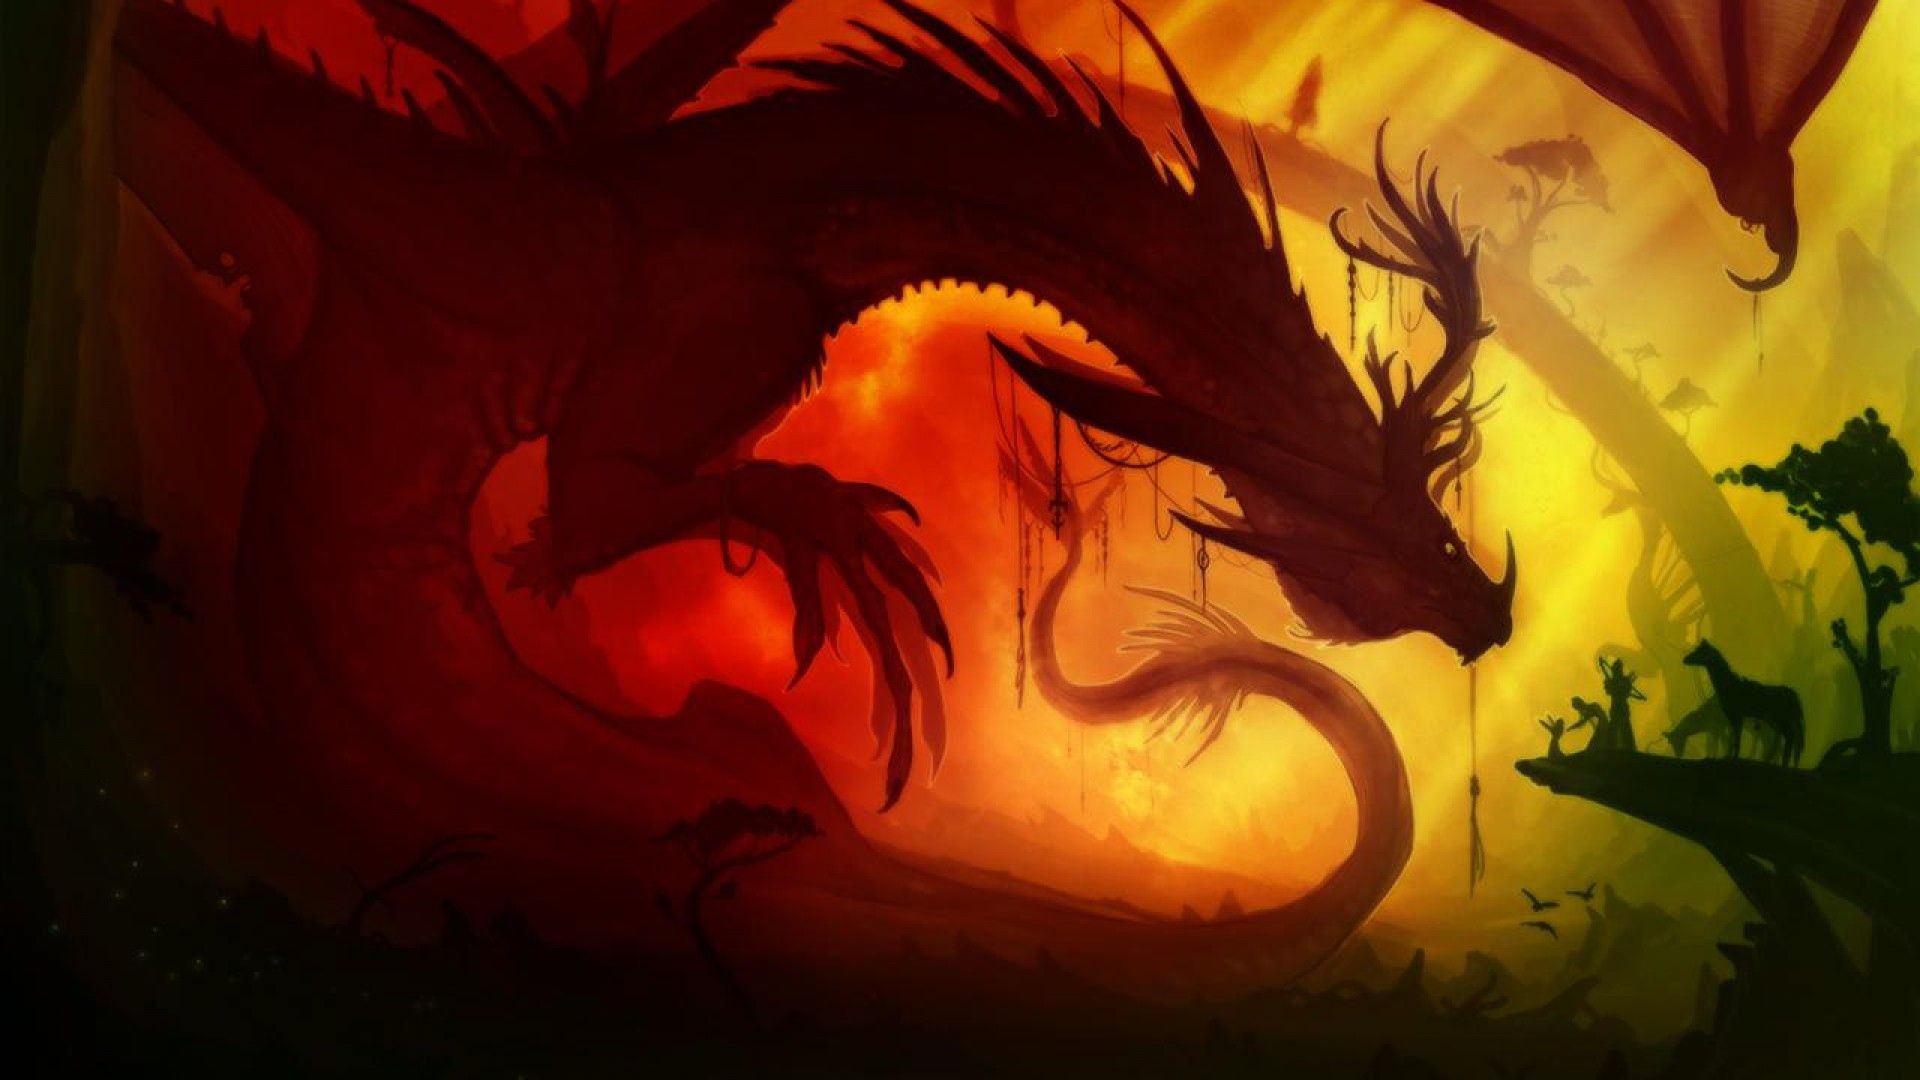 Dragon HD Wallpapers 1080p 52 Wallpapers